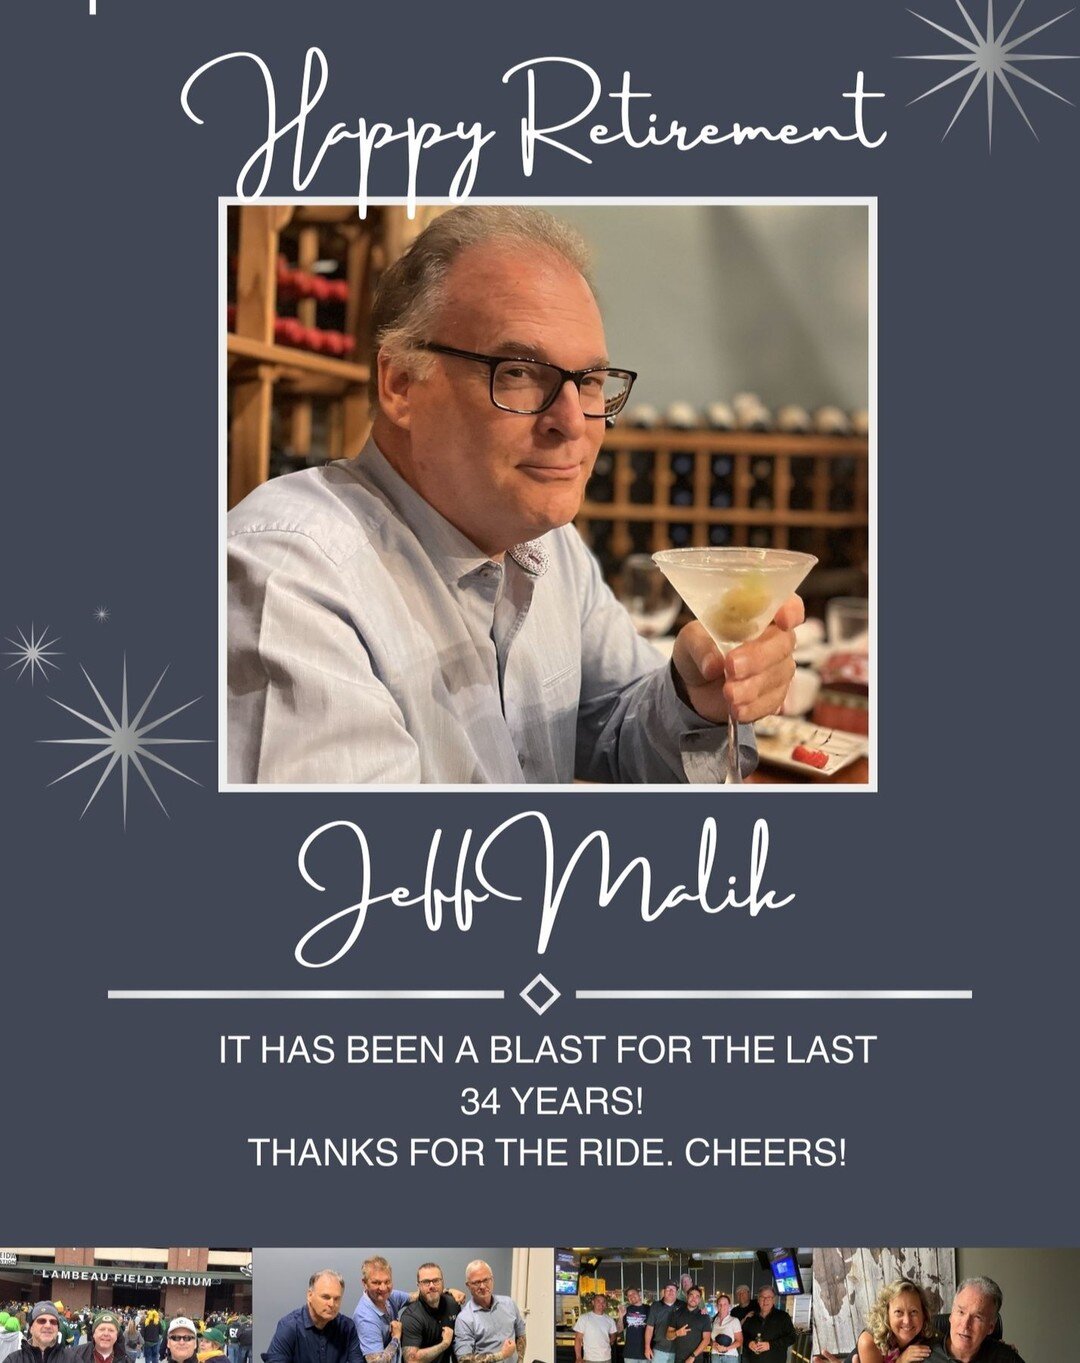 It's Jeff Malik's last week at MTA! Please join us in wishing him all the best on his well earned retirement and 34 years with MTA! 🙂